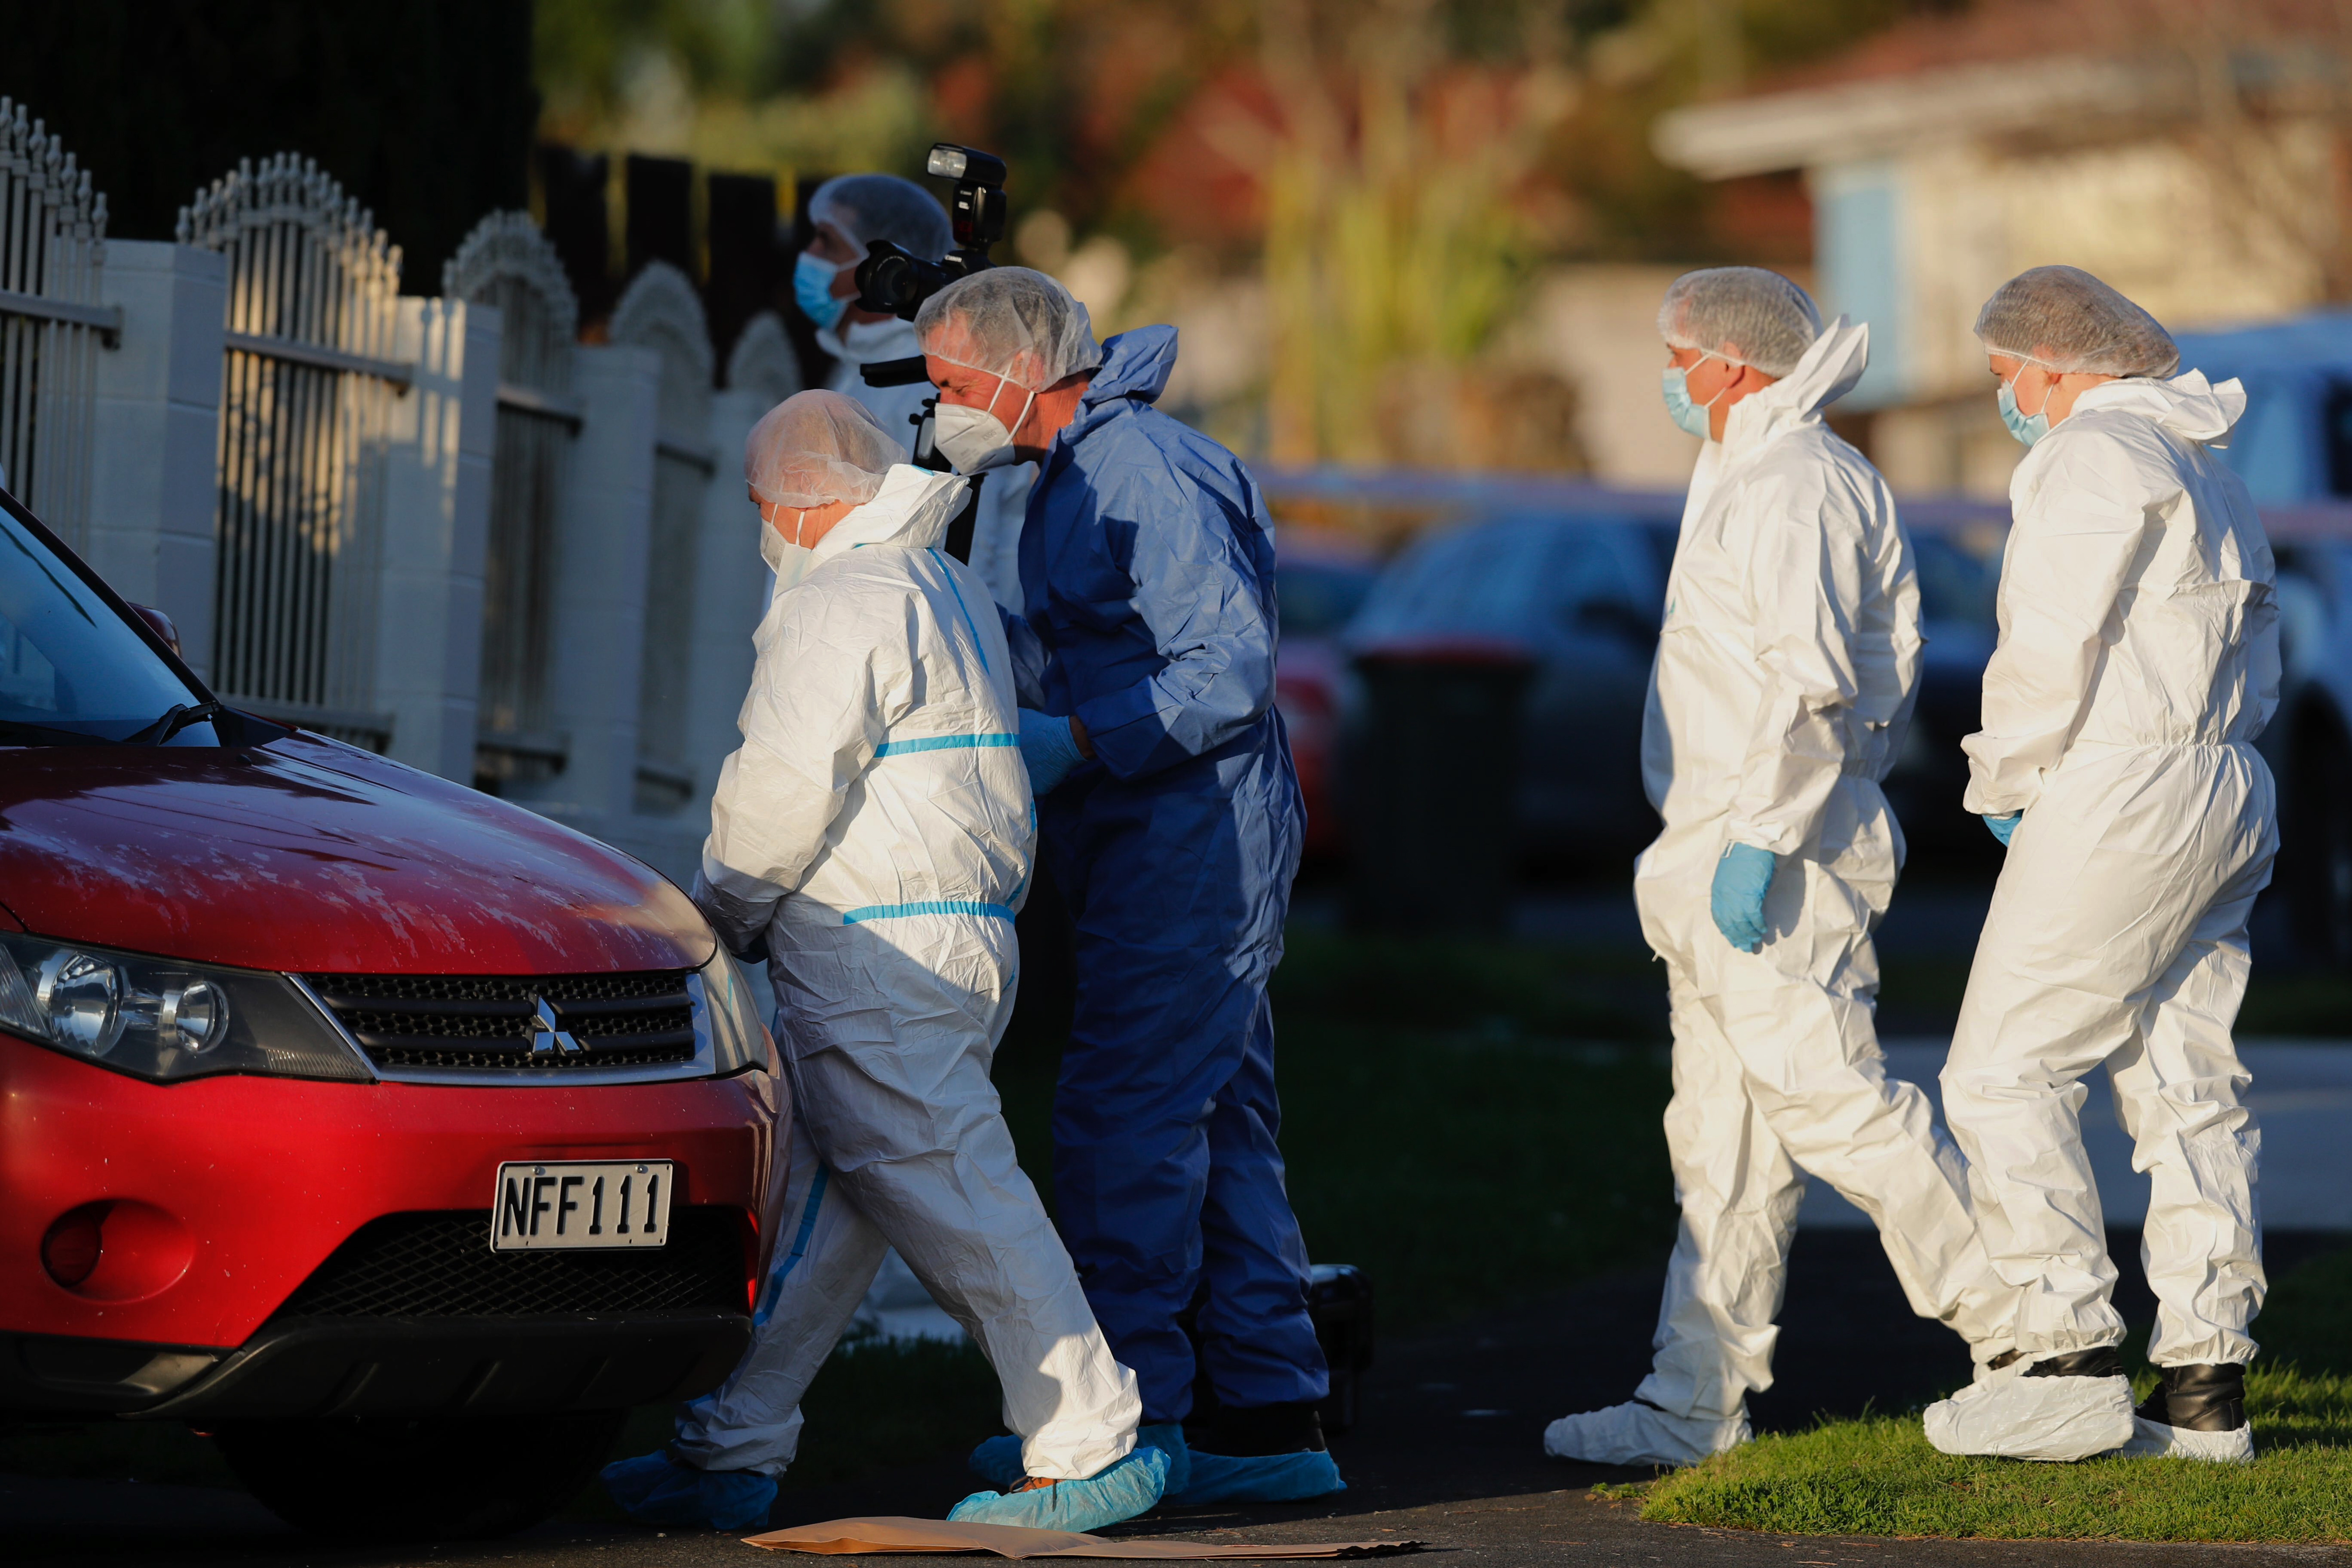 New Zealand Police investigators work at a scene in Auckland after bodies were found in suitcases 